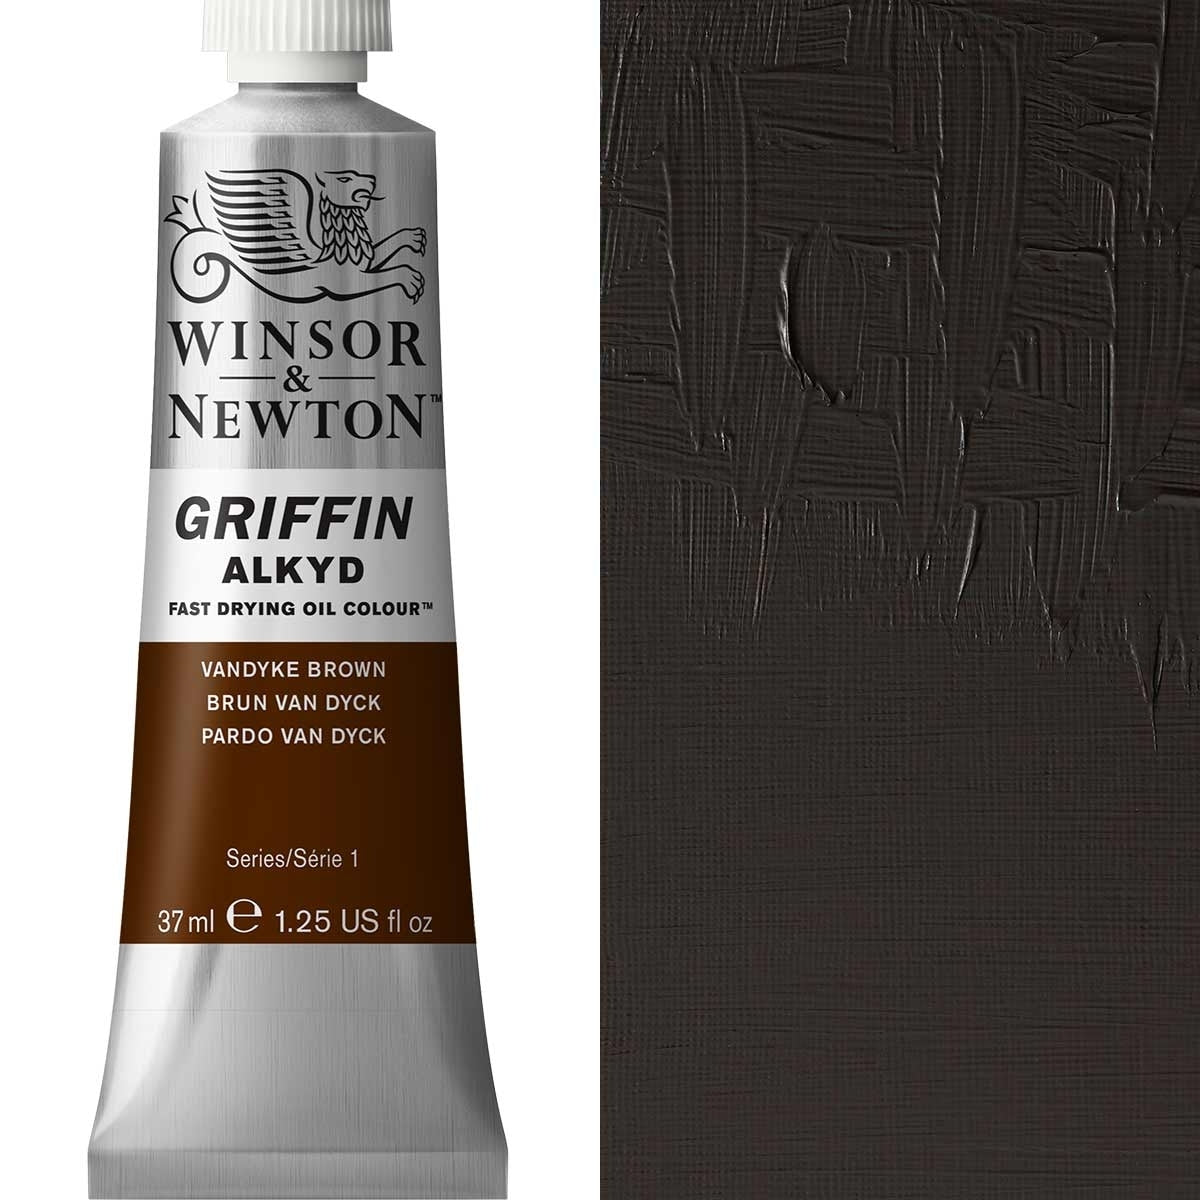 Winsor and Newton - Griffin ALKYD Oil Colour - 37ml - Vandyke Brown